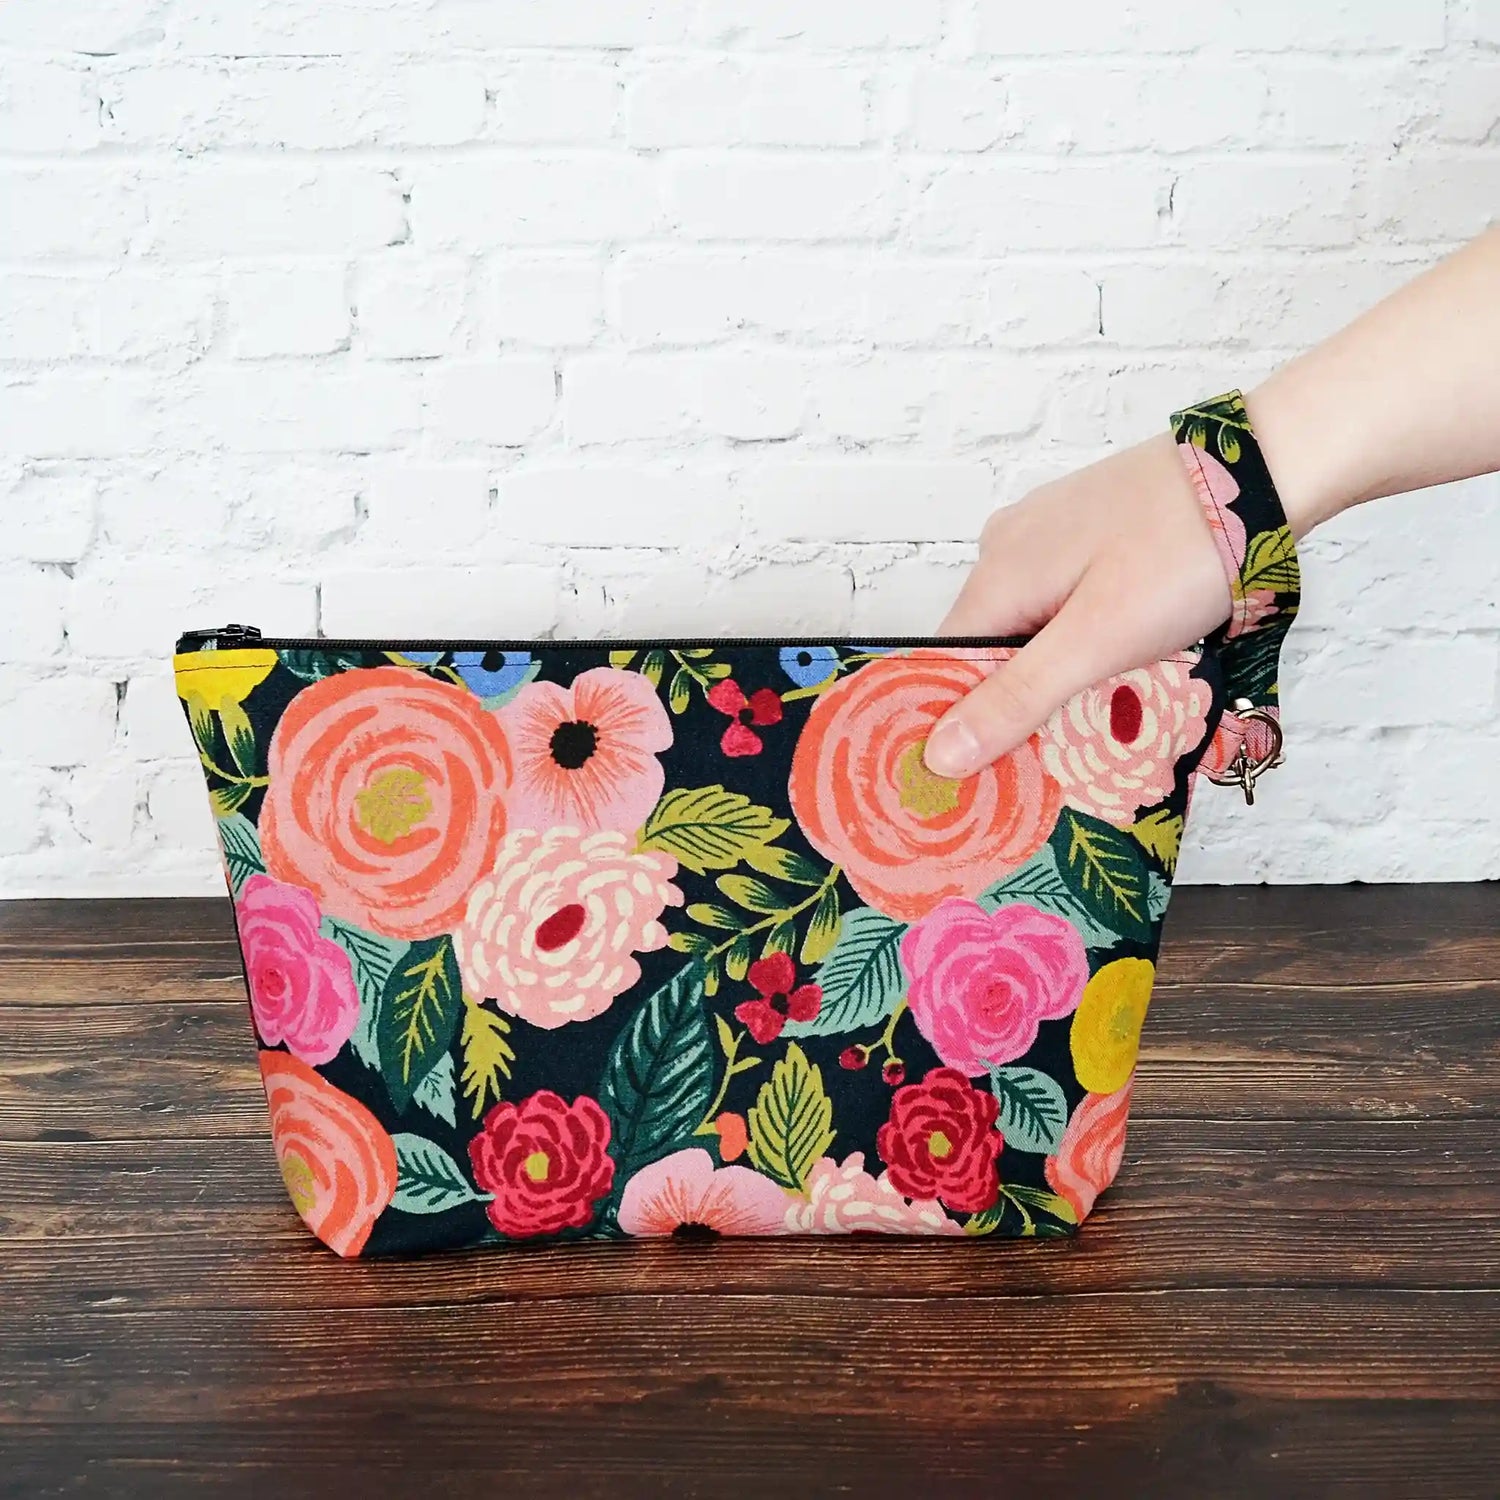 Canvas zippered project bag in a striking floral print with a black background.  Designed for small projects using Rifle Paper Co. fabric.  Made in Nova Scotia, Canada by Yellow Petal Handmade.